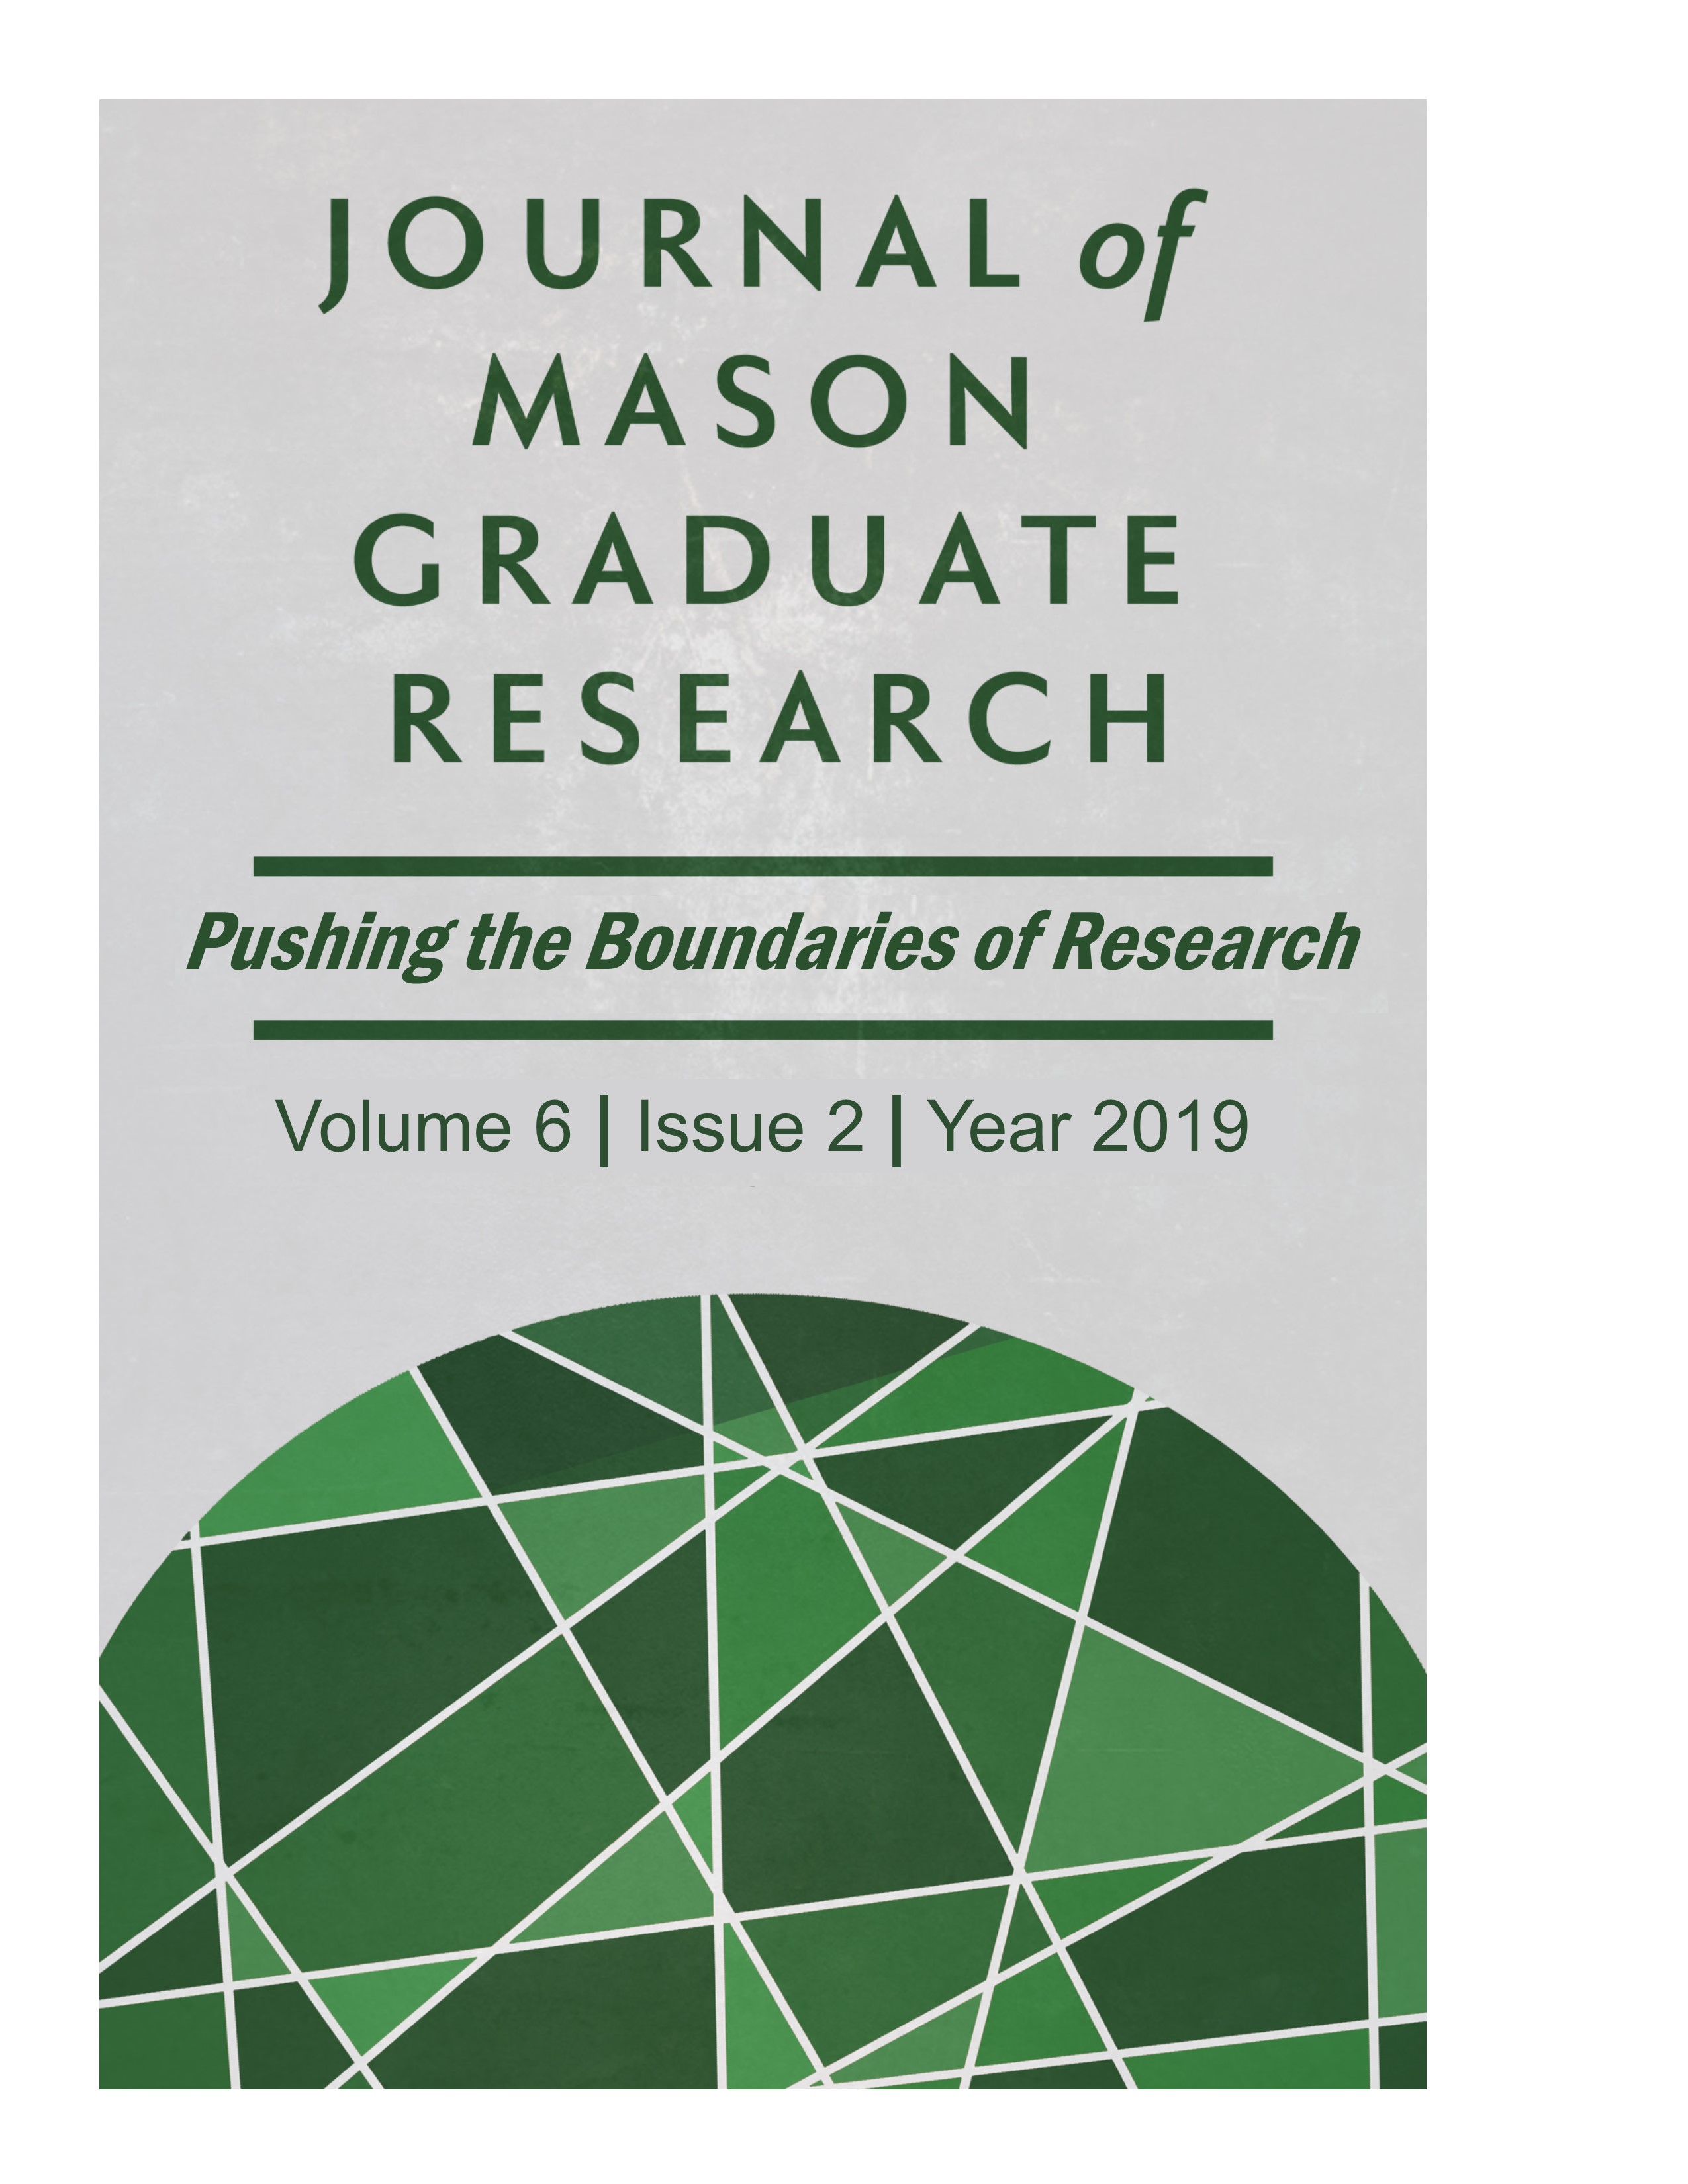 Journal of Mason Graduate Research, Volume 6, Issue 2, 2019